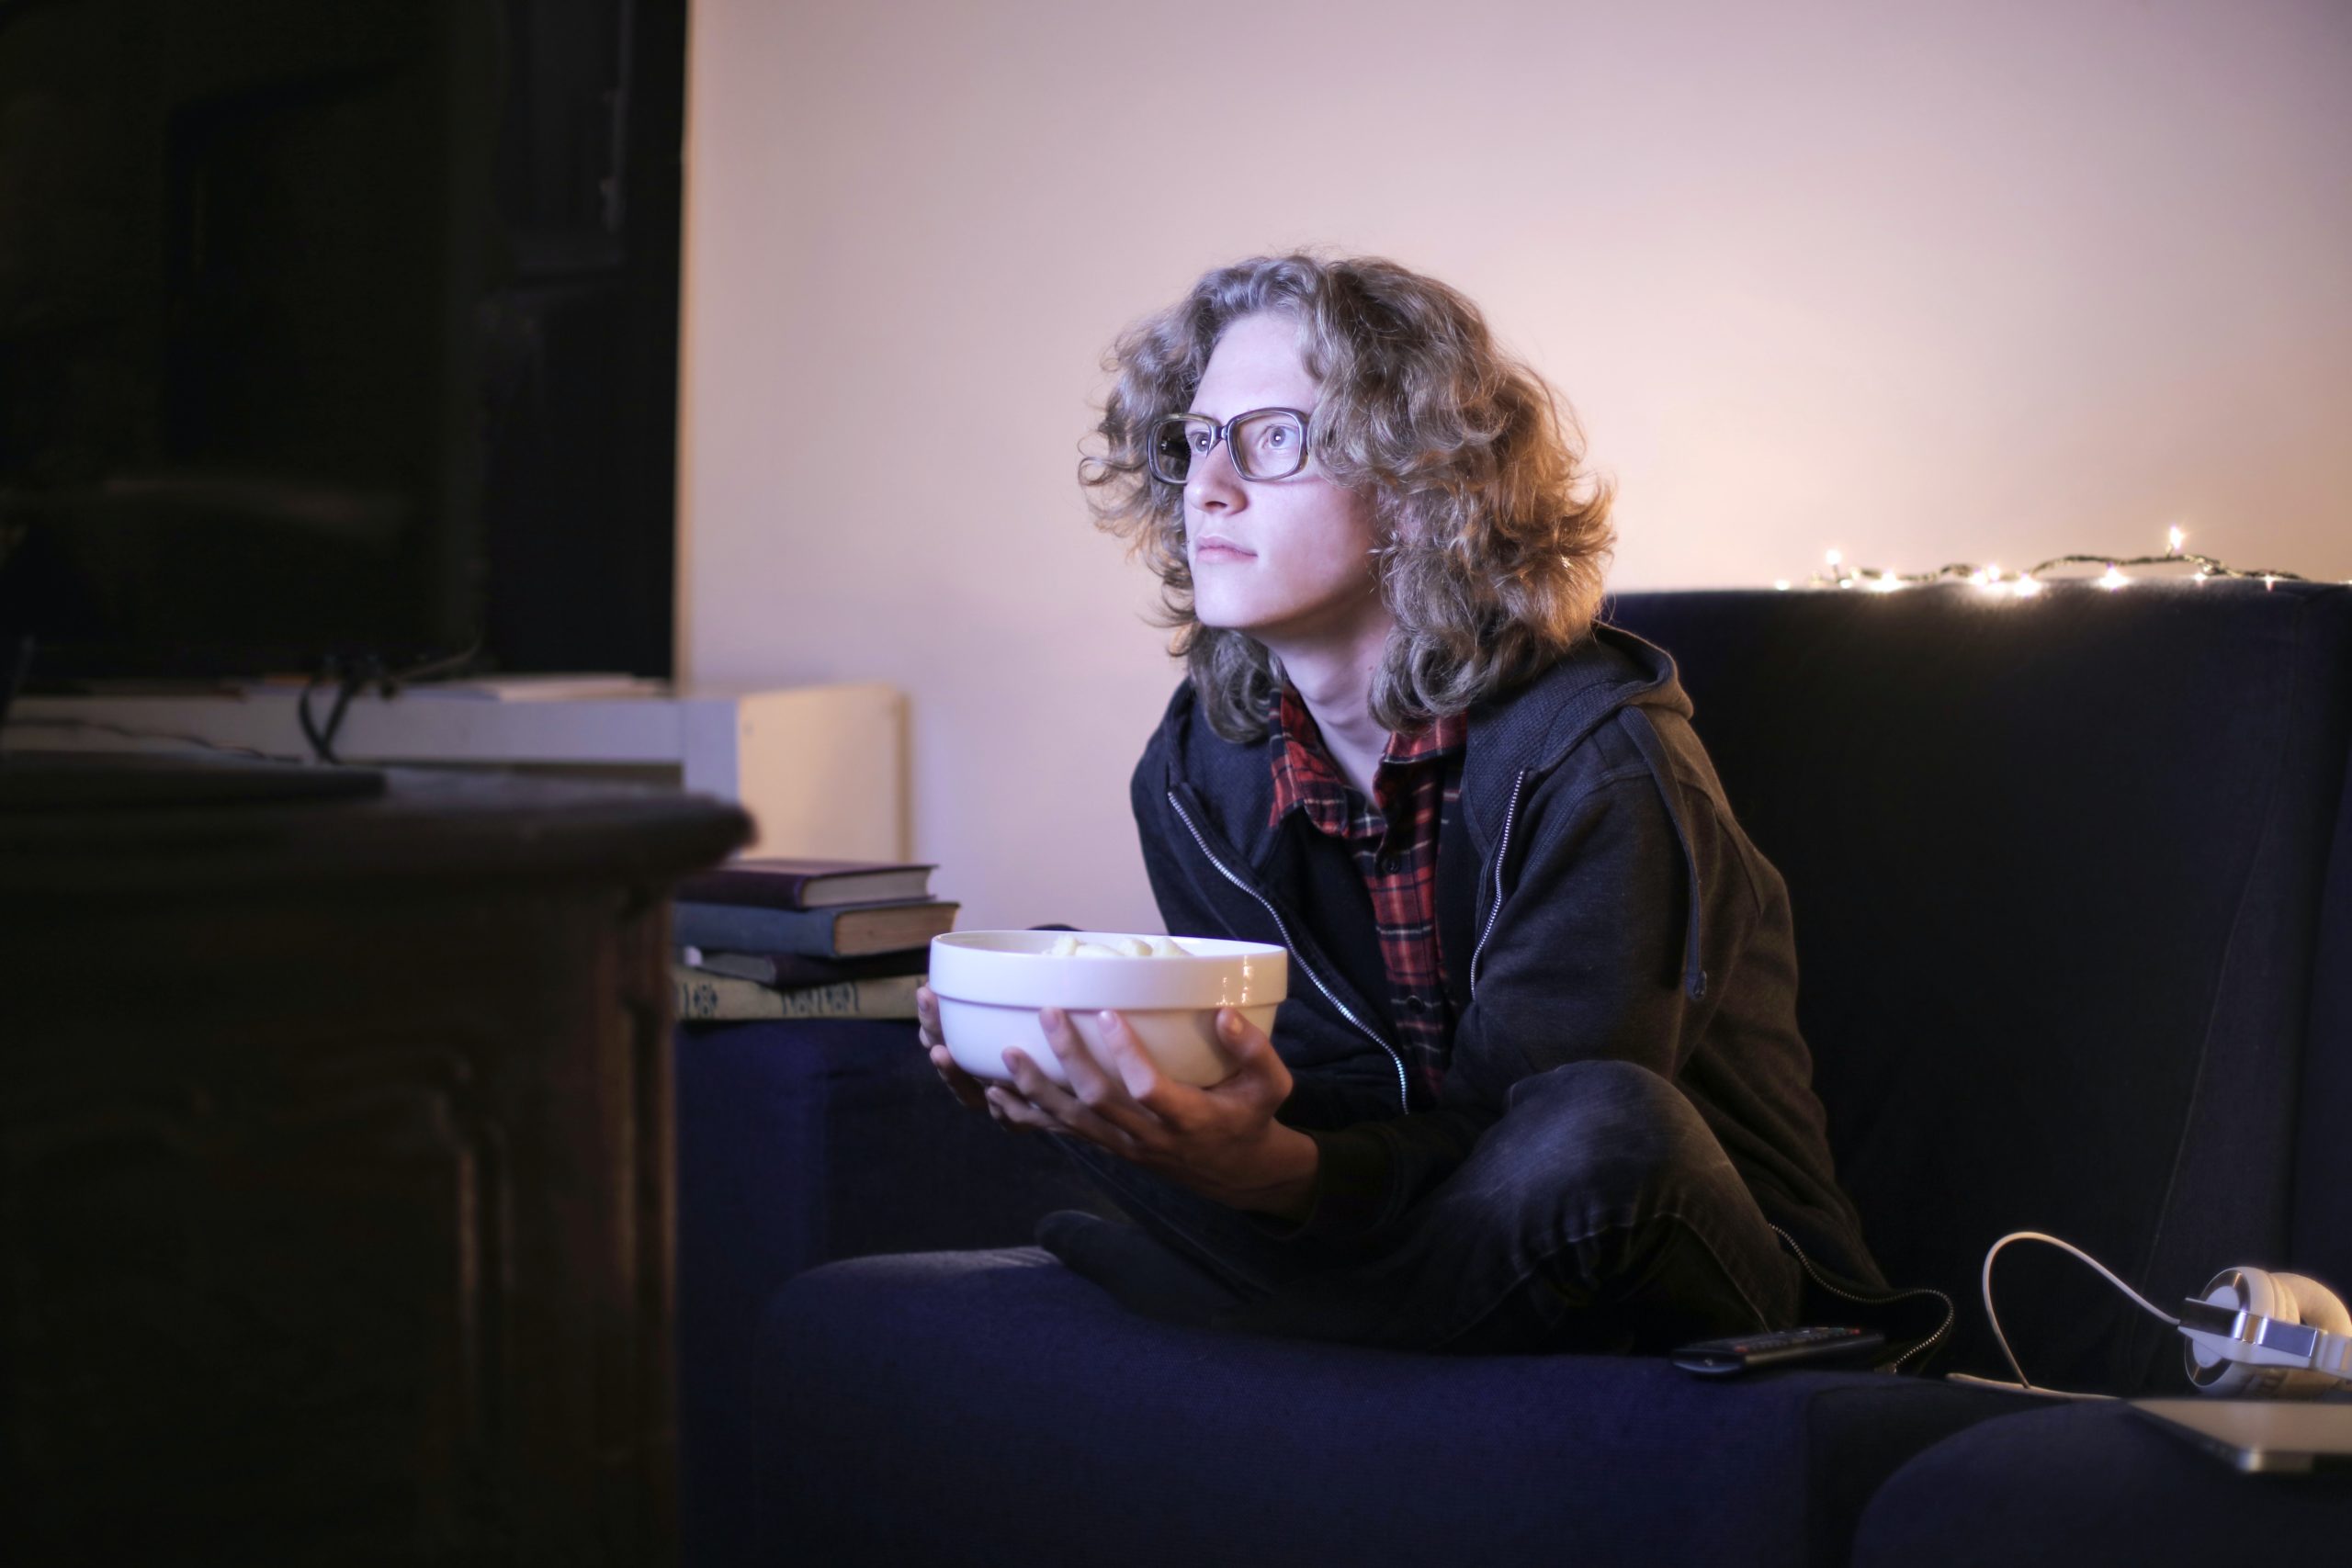 A young man is watching a film on TV. He is holding a big bowl of popcorn.